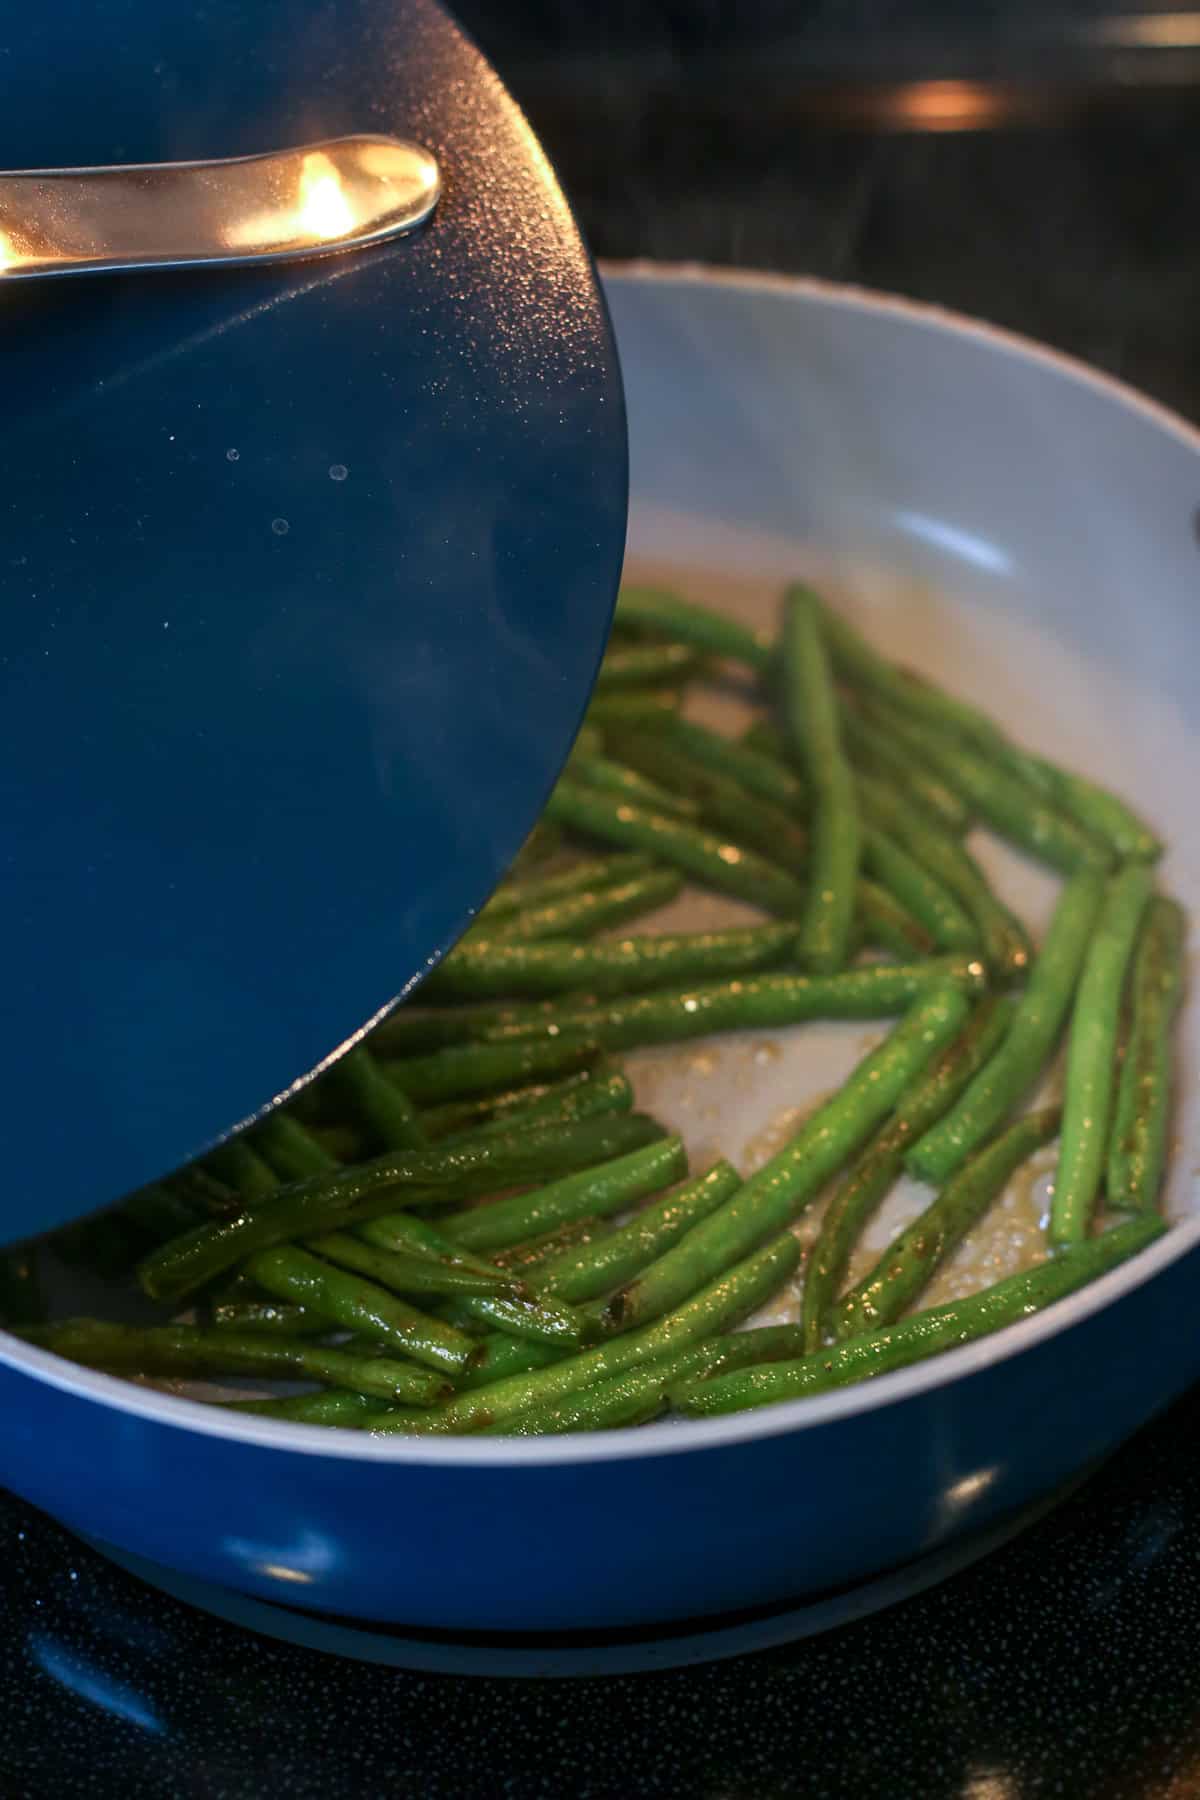 Steaming green beans on the stove